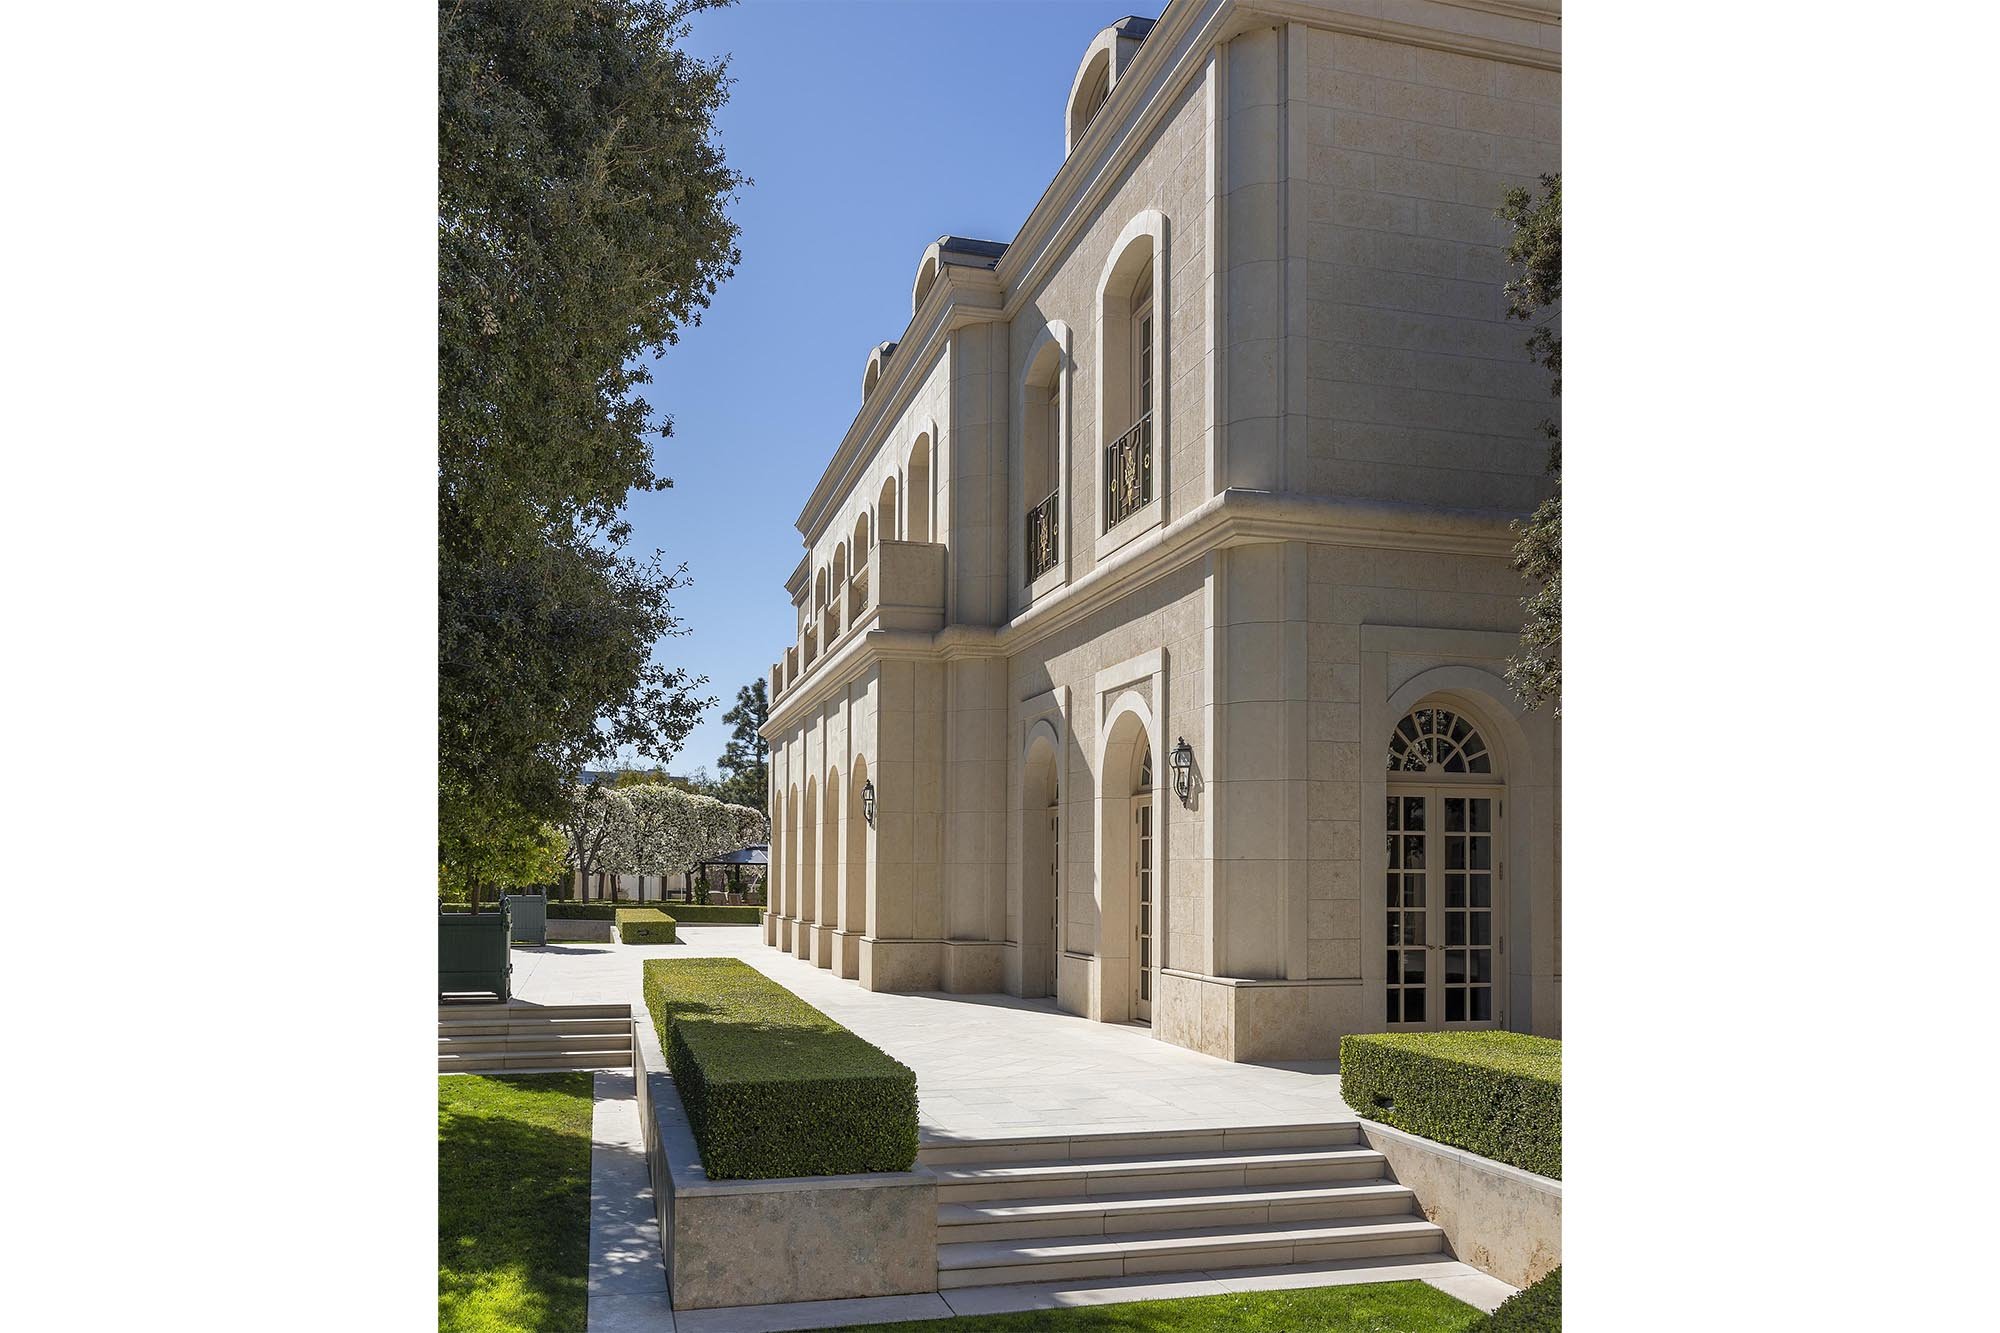 Francis York The 'Spelling Manor' is Back on the Market for $165M 5.jpg